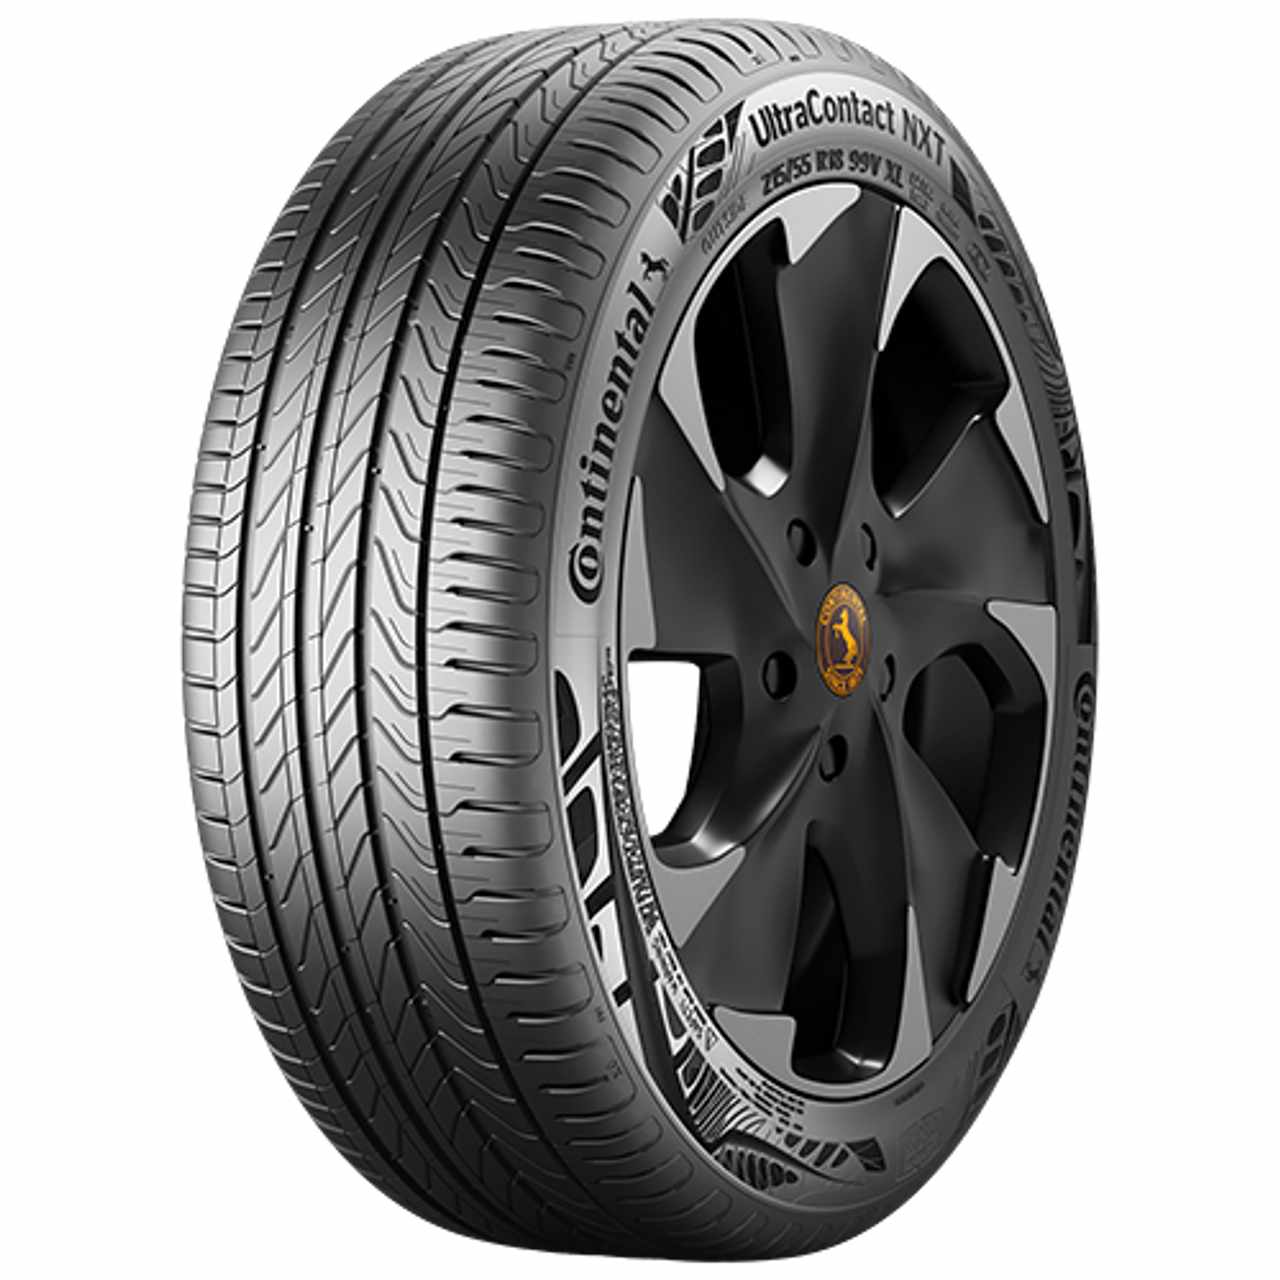 CONTINENTAL ULTRACONTACT NXT (EVc) 225/50R18 99W FR BSW XL